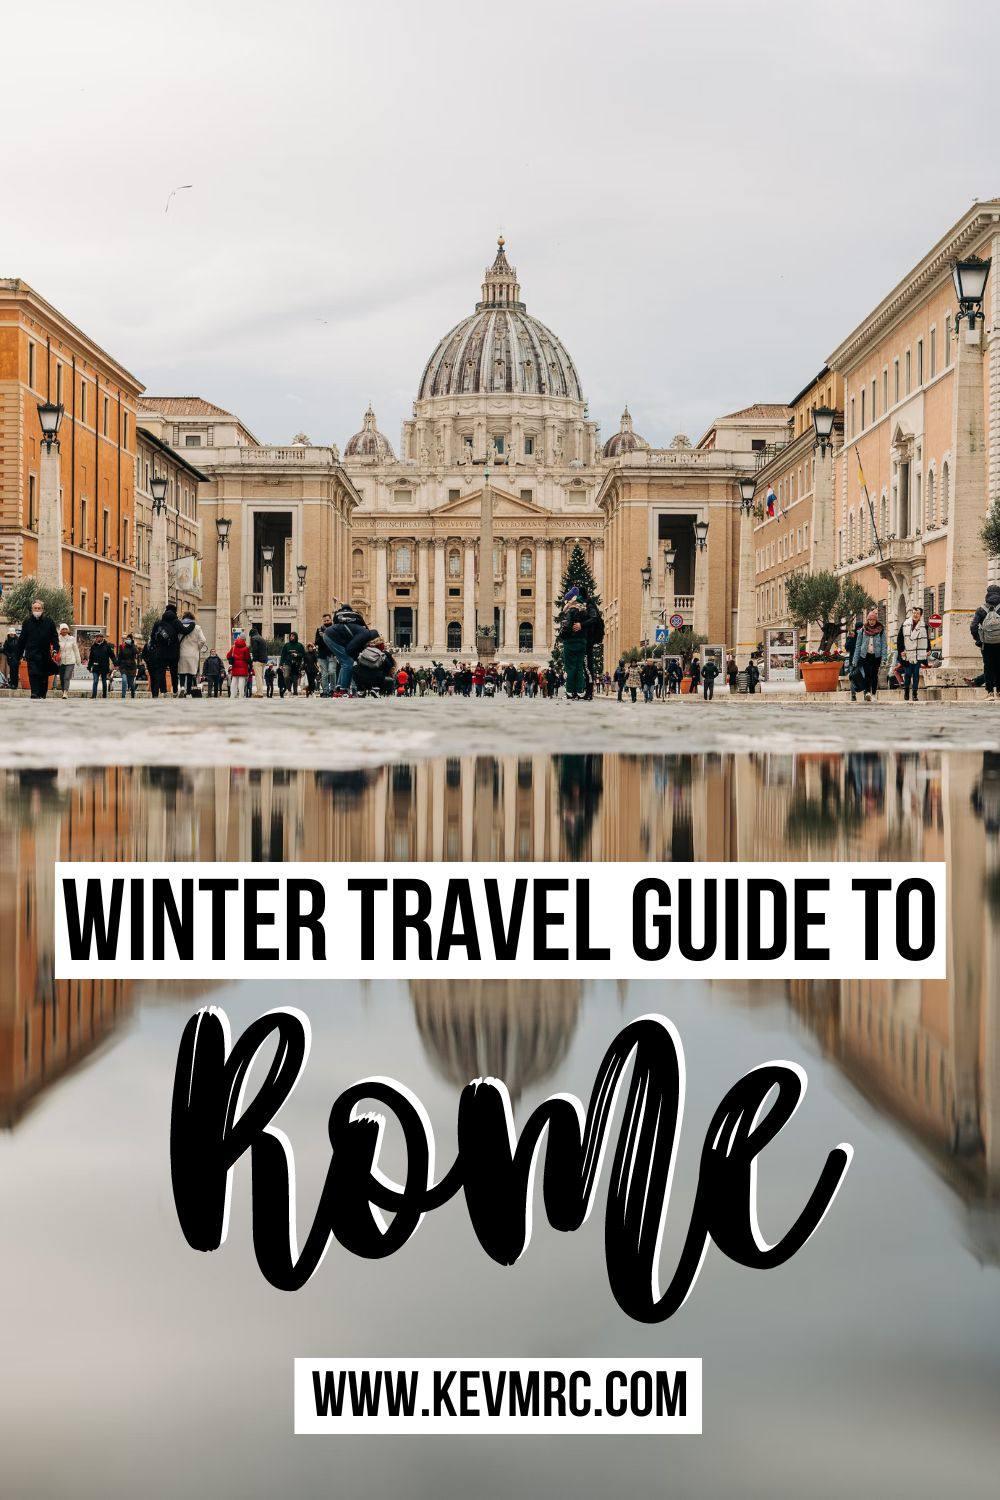 Wondering what to do in Rome in winter? Here are the 20 best things to do in Rome in winter, with info about the weather, what to pack, and more tips. #rome